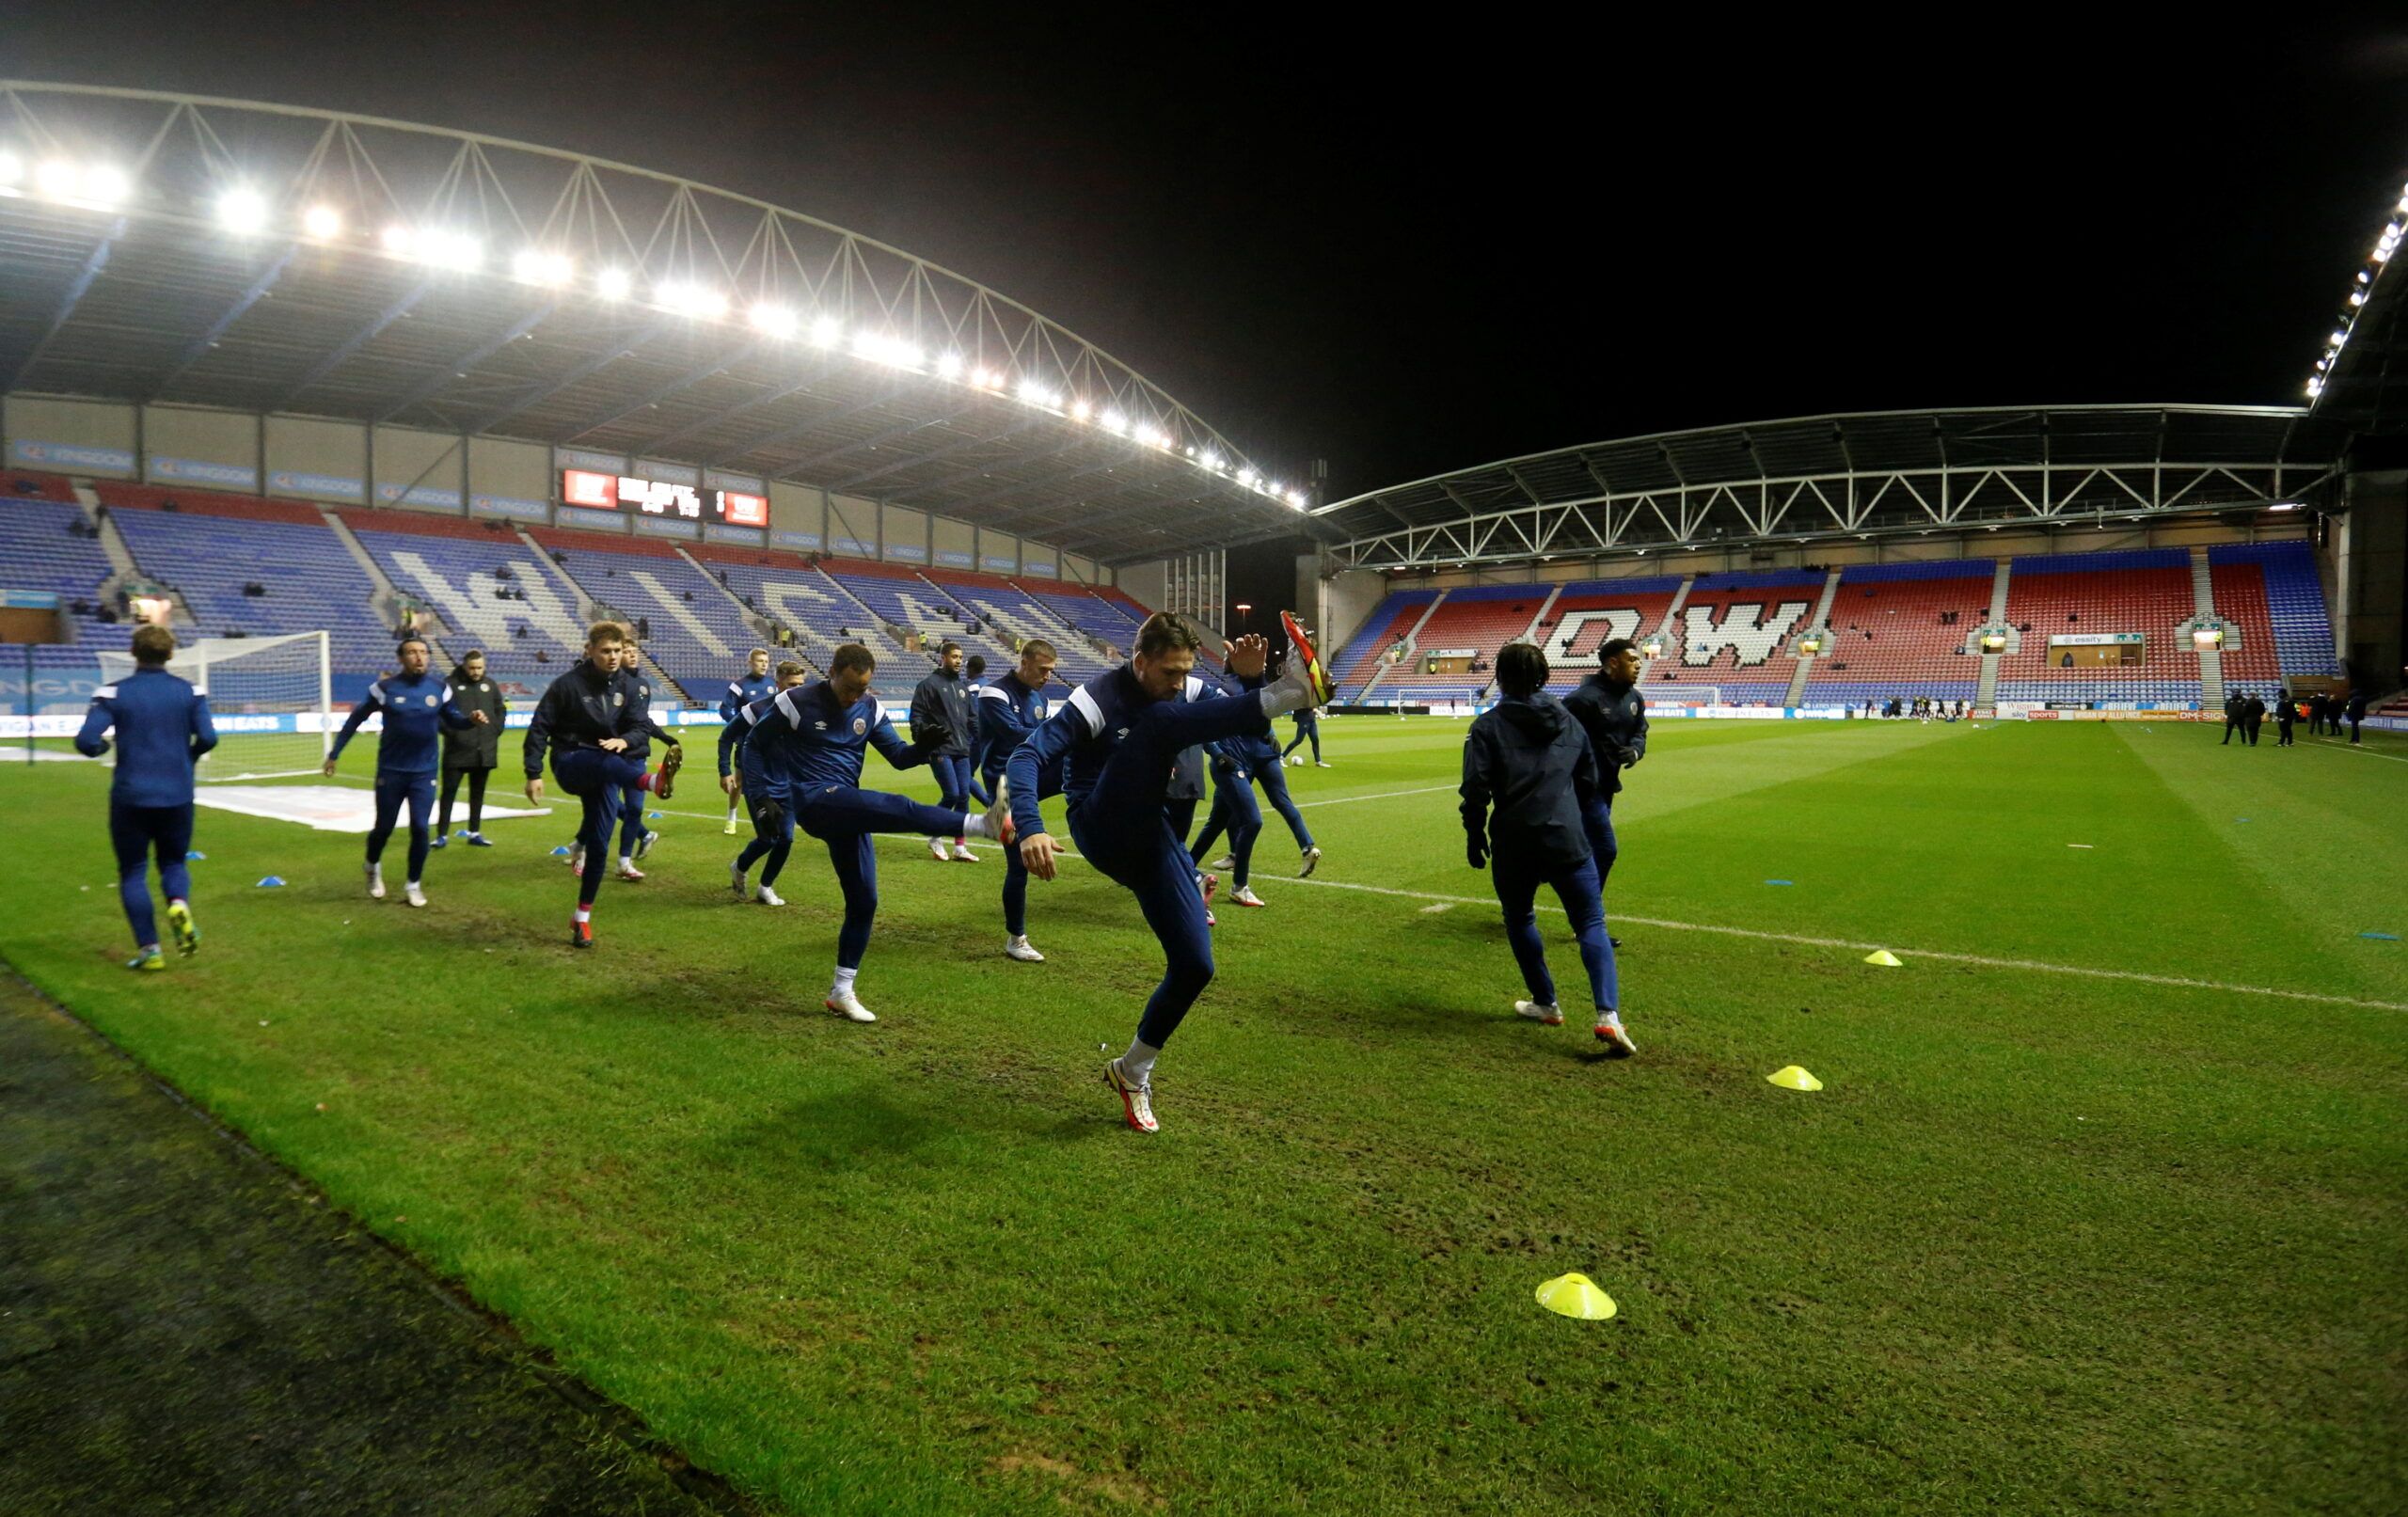 Soccer Football - League One - Wigan Athletic v Shrewsbury Town - DW Stadium, Wigan, Britain - December 8, 2021  Shrewsbury Town players warm up before the match  Action Images/Ed Sykes  EDITORIAL USE ONLY. No use with unauthorized audio, video, data, fixture lists, club/league logos or 